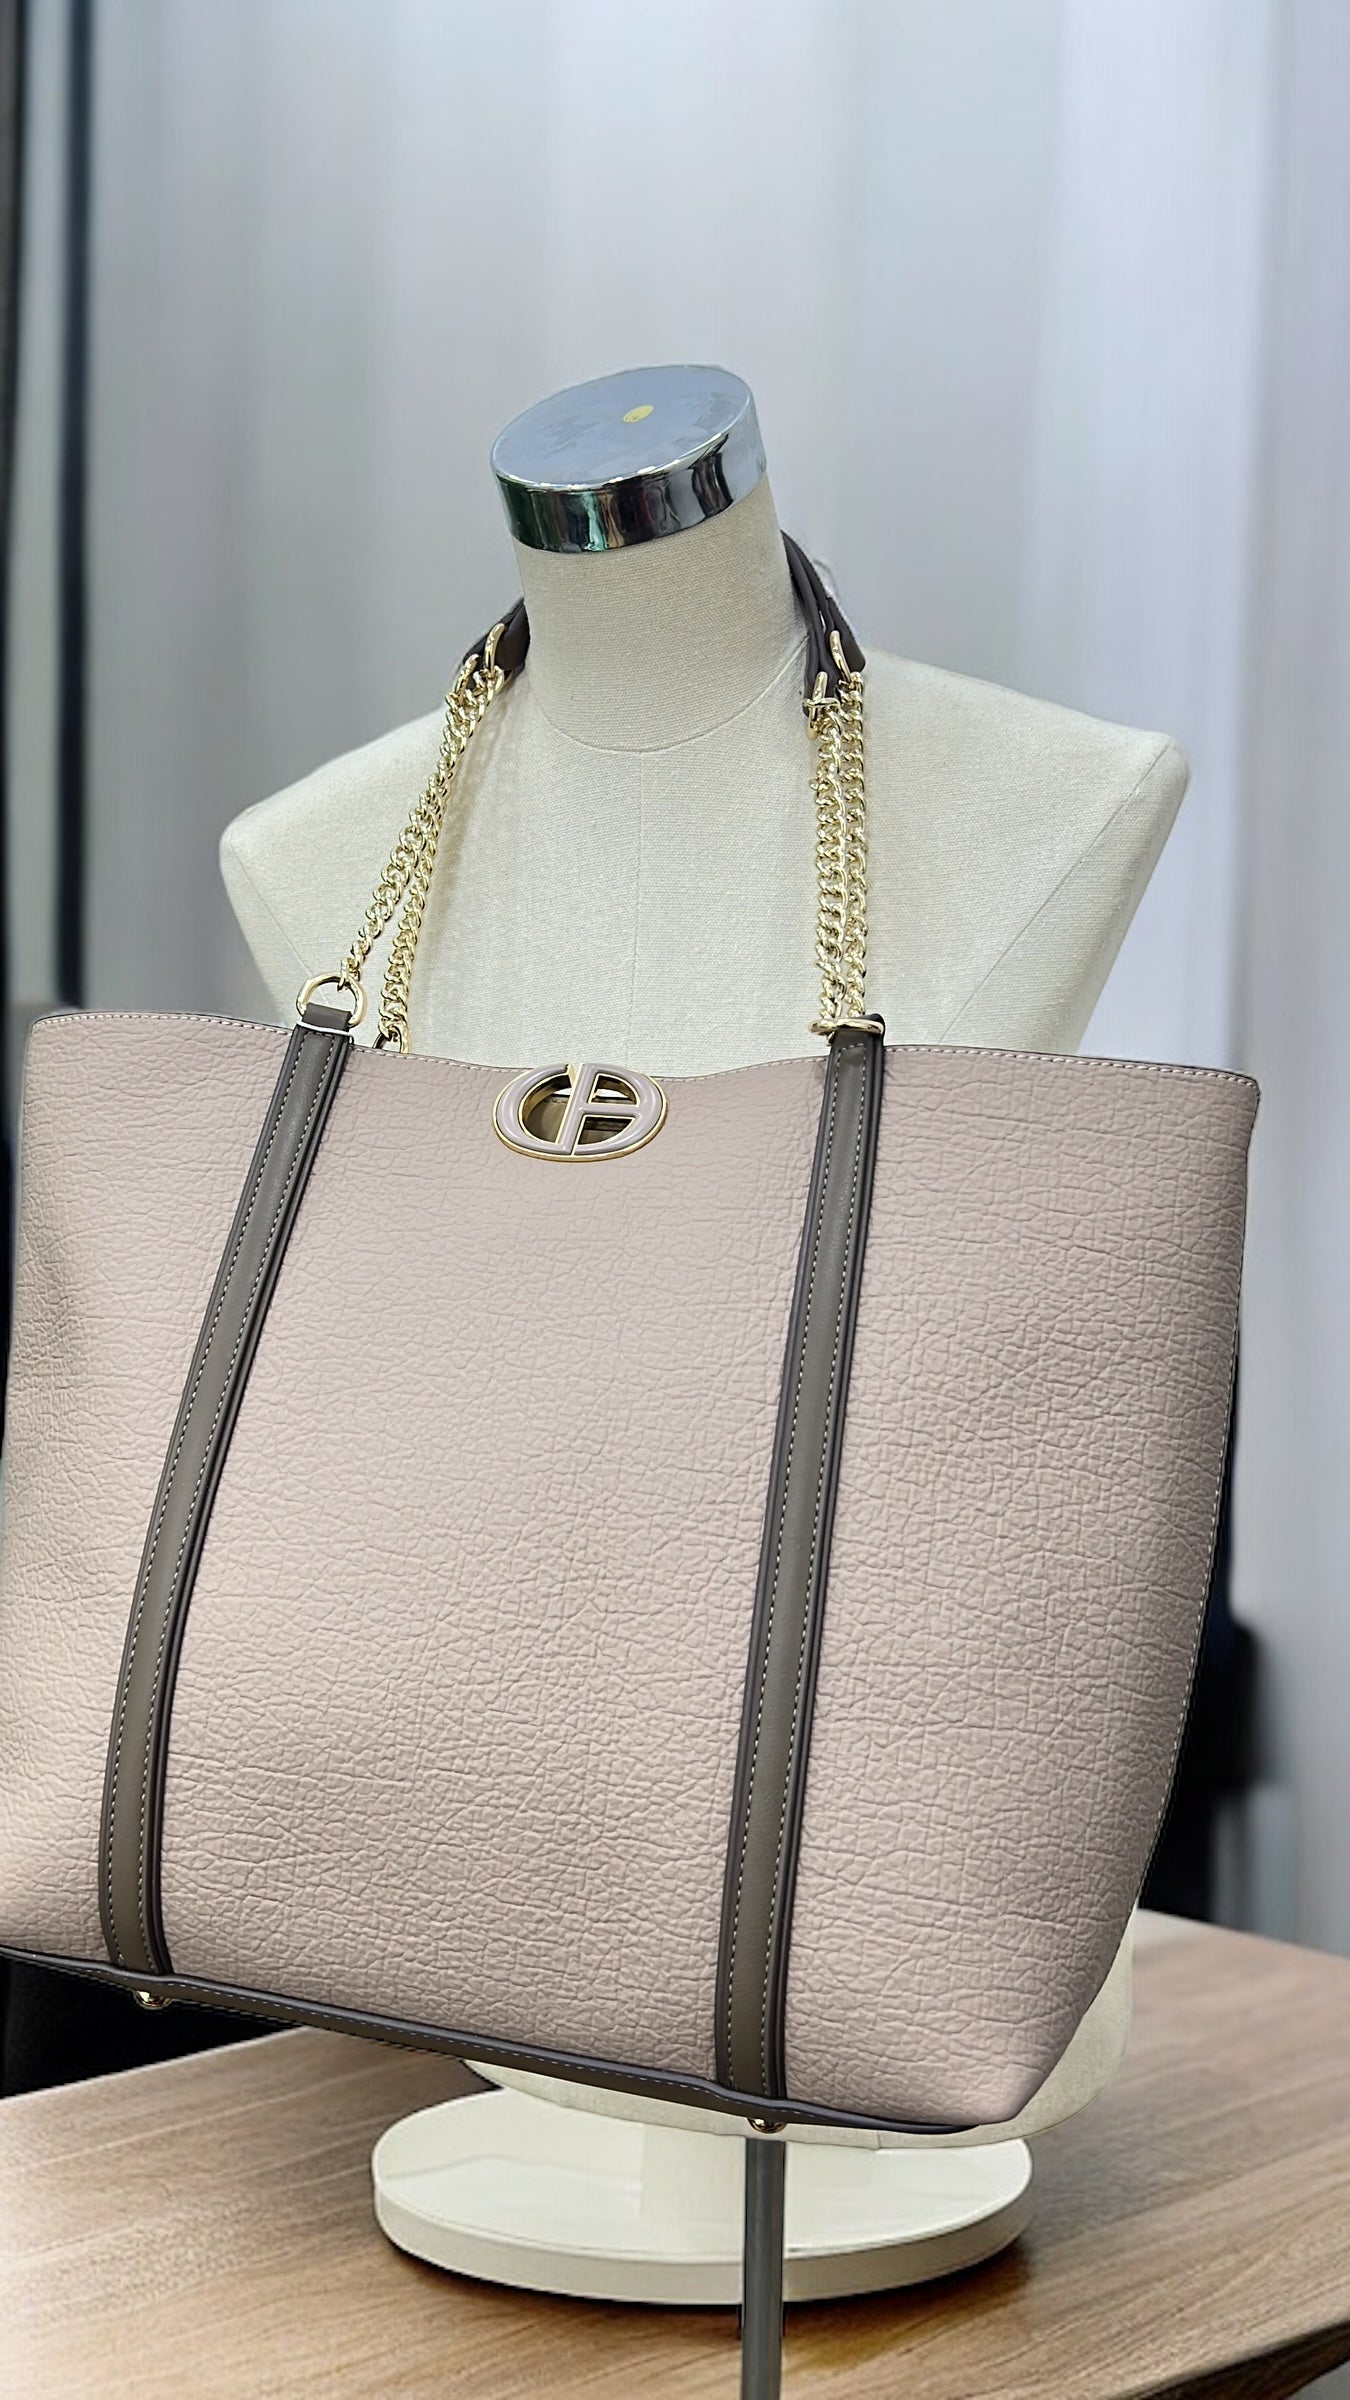 CHRISBELLA LARGE CHAIN HANDLE PANEL BAG IN APRICOT